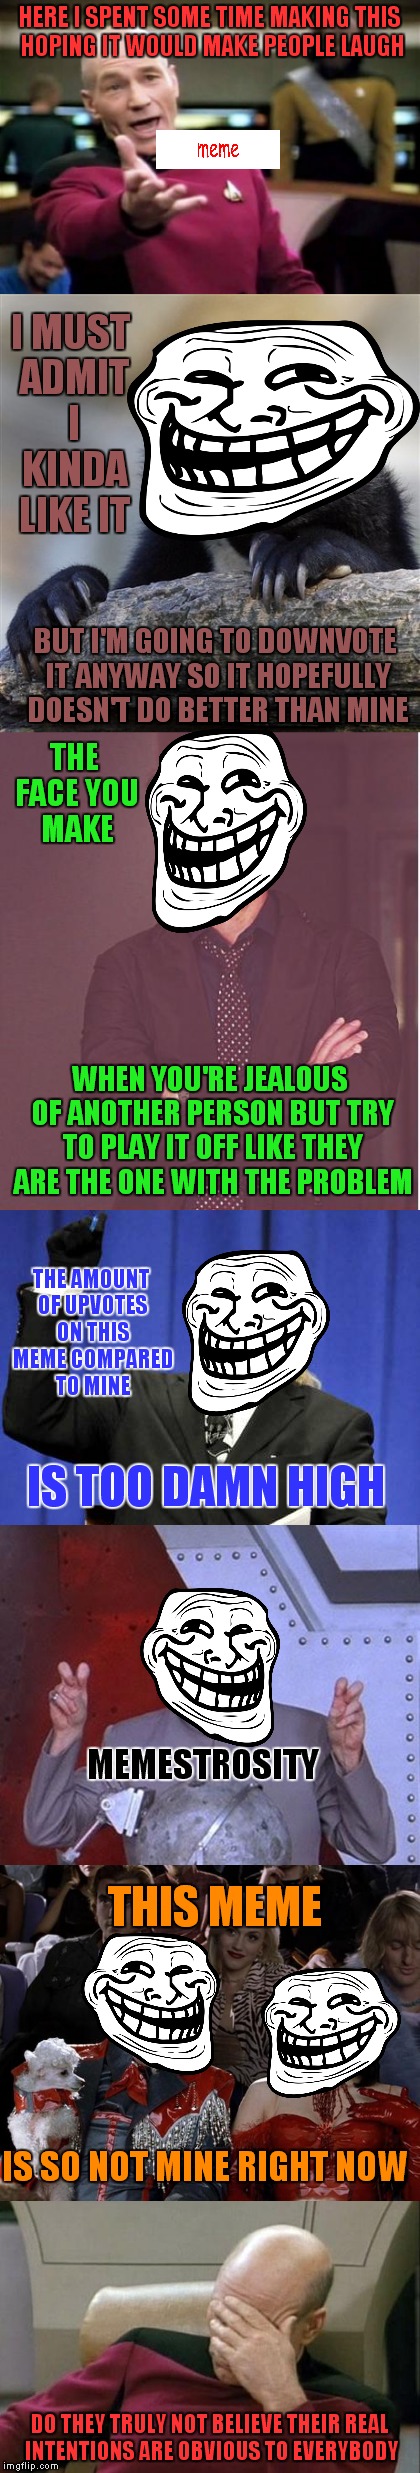 Trolls will never admit the real reason they troll. Most of them can't even admit it to themselves |  HERE I SPENT SOME TIME MAKING THIS HOPING IT WOULD MAKE PEOPLE LAUGH; I MUST ADMIT I KINDA LIKE IT; BUT I'M GOING TO DOWNVOTE IT ANYWAY SO IT HOPEFULLY DOESN'T DO BETTER THAN MINE; THE FACE YOU MAKE; WHEN YOU'RE JEALOUS OF ANOTHER PERSON BUT TRY TO PLAY IT OFF LIKE THEY ARE THE ONE WITH THE PROBLEM; THE AMOUNT OF UPVOTES ON THIS MEME COMPARED TO MINE; IS TOO DAMN HIGH; MEMESTROSITY; THIS MEME; IS SO NOT MINE RIGHT NOW; DO THEY TRULY NOT BELIEVE THEIR REAL INTENTIONS ARE OBVIOUS TO EVERYBODY | image tagged in meme war,get trolled alt delete,the troll is you,sad troll face,captain obvious- you don't say | made w/ Imgflip meme maker